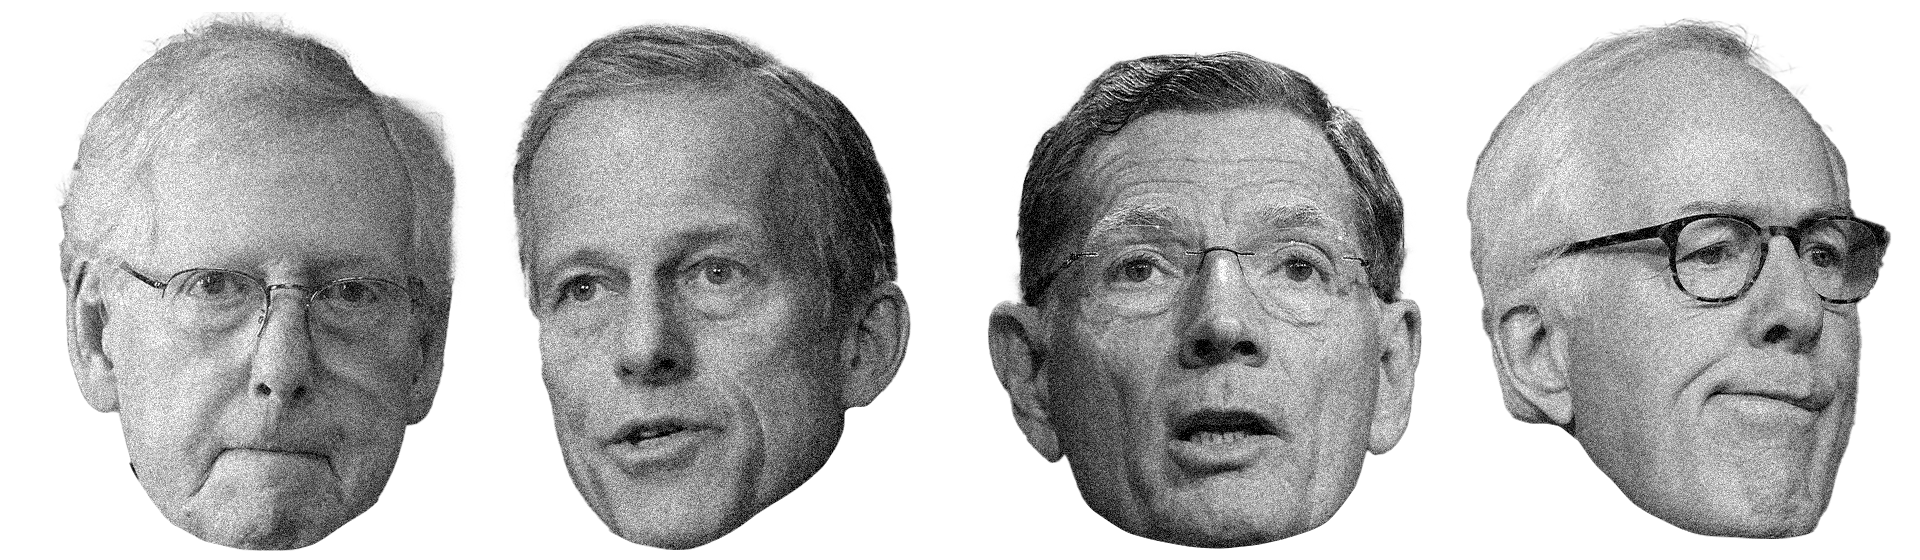 The faces of Mitch McConnell, John Thune, John Barrasso, and John Cornyn, side by side and in black and white.